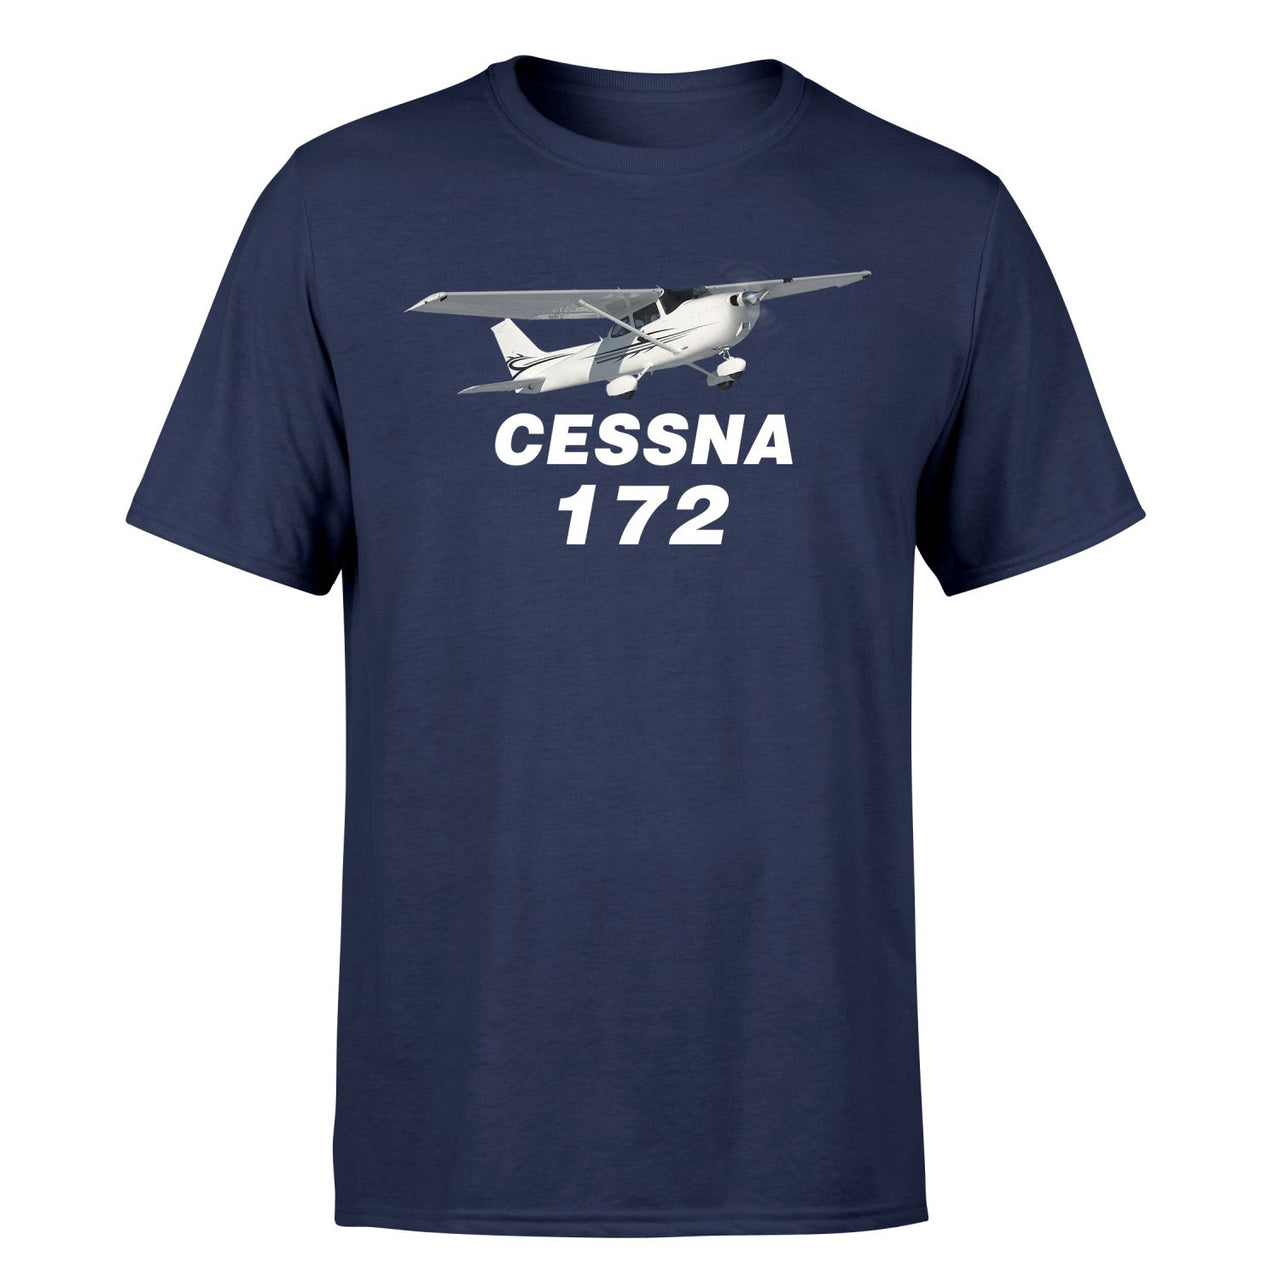 The Cessna 172 Designed T-Shirts